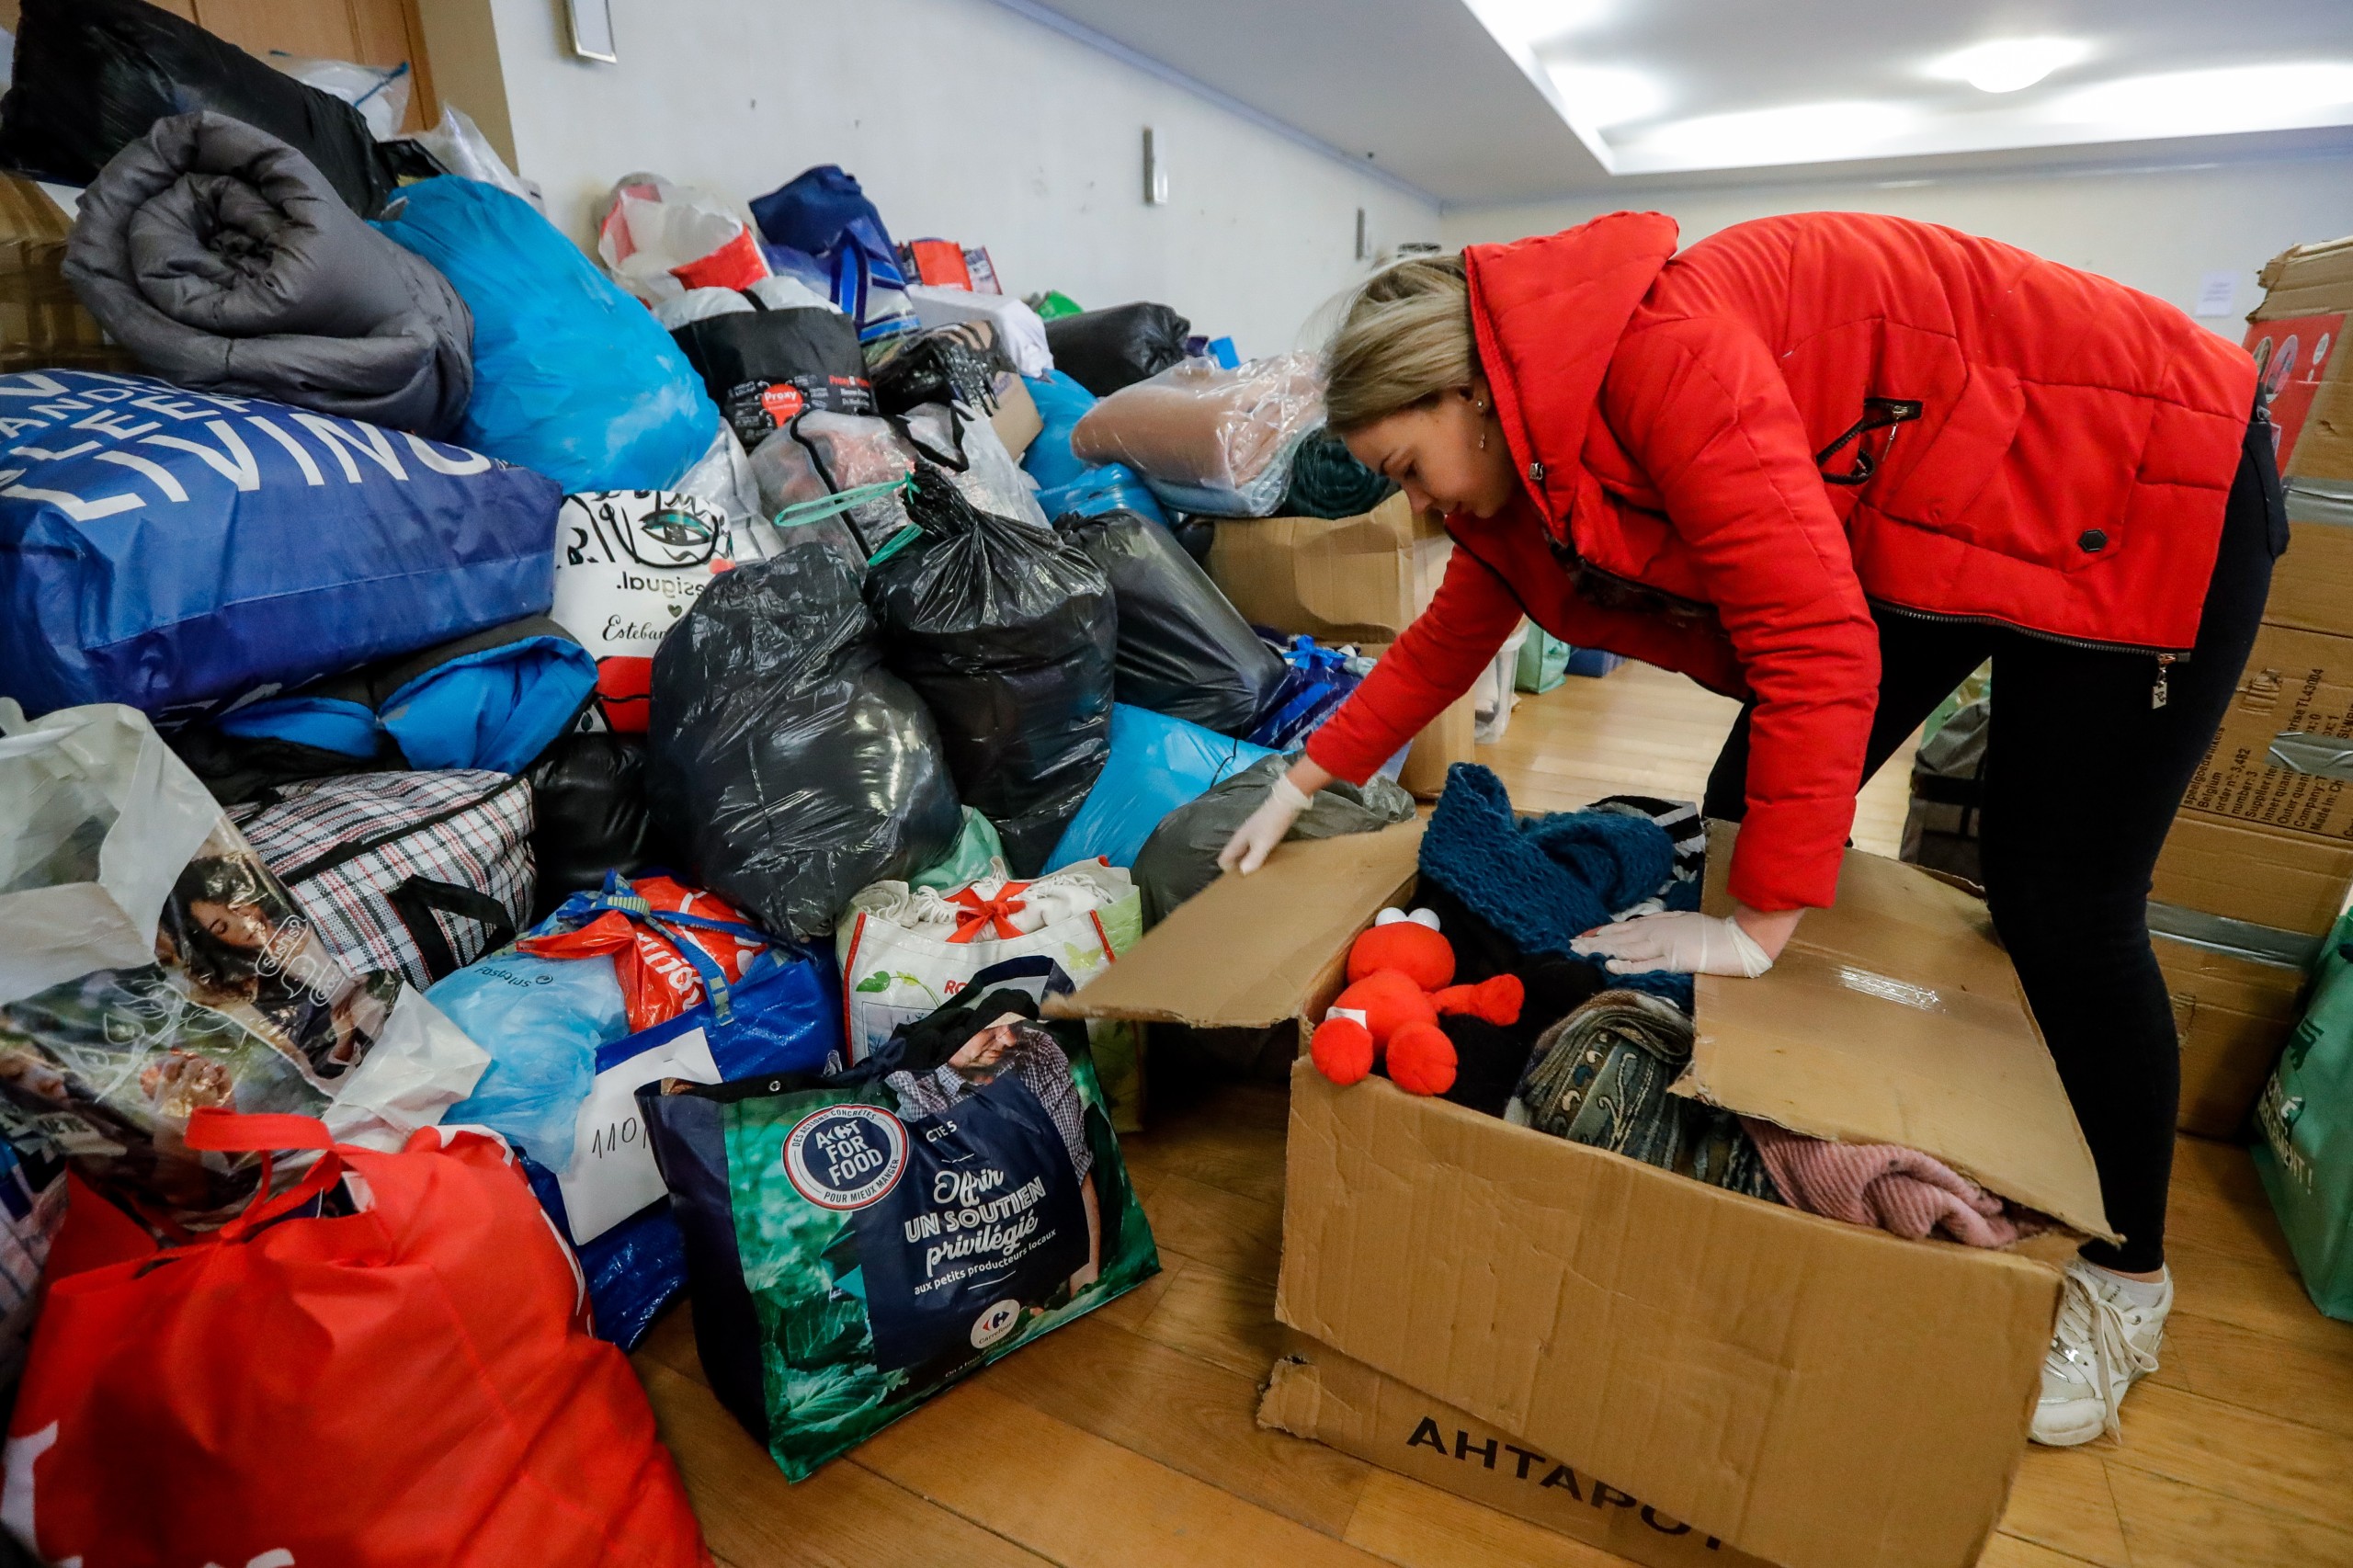 epa09798830 A Ukrainian volunteer sorts humanitarian packages, arranged by the type of product, destined to help the Ukrainian population, at the Embassy of Ukraine in Brussels, Belgium, 03 March 2022. Given the influx of people donating humanitarian packages, Ukraine's embassy in Brussels is no longer able to collect all the donations. A new collection point has been opened at Plais 11 of the Brussels Expo. Only military equipment can still be received at the embassy.  EPA/STEPHANIE LECOCQ